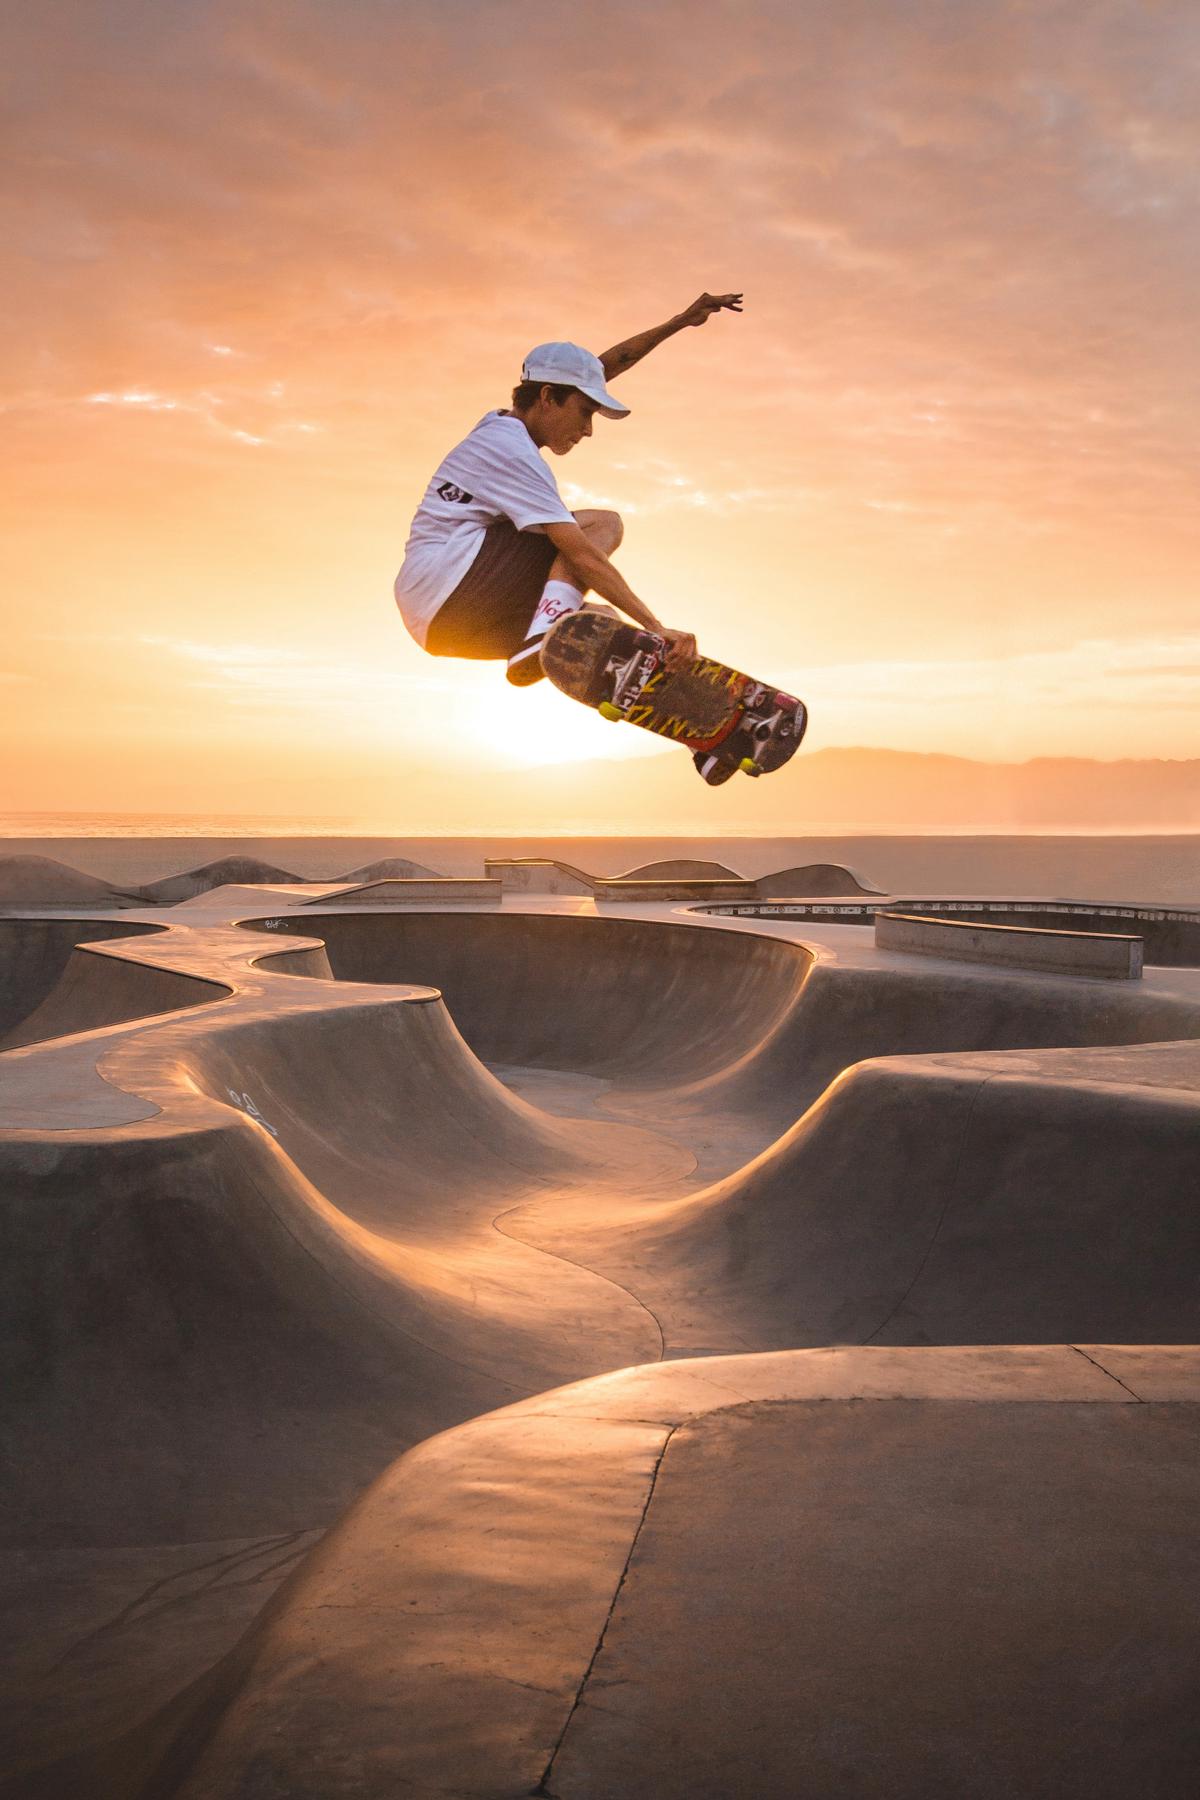 Image illustrating off-road electric skateboards overcoming rocky terrains, conveying the thrill and adventure of this sport.